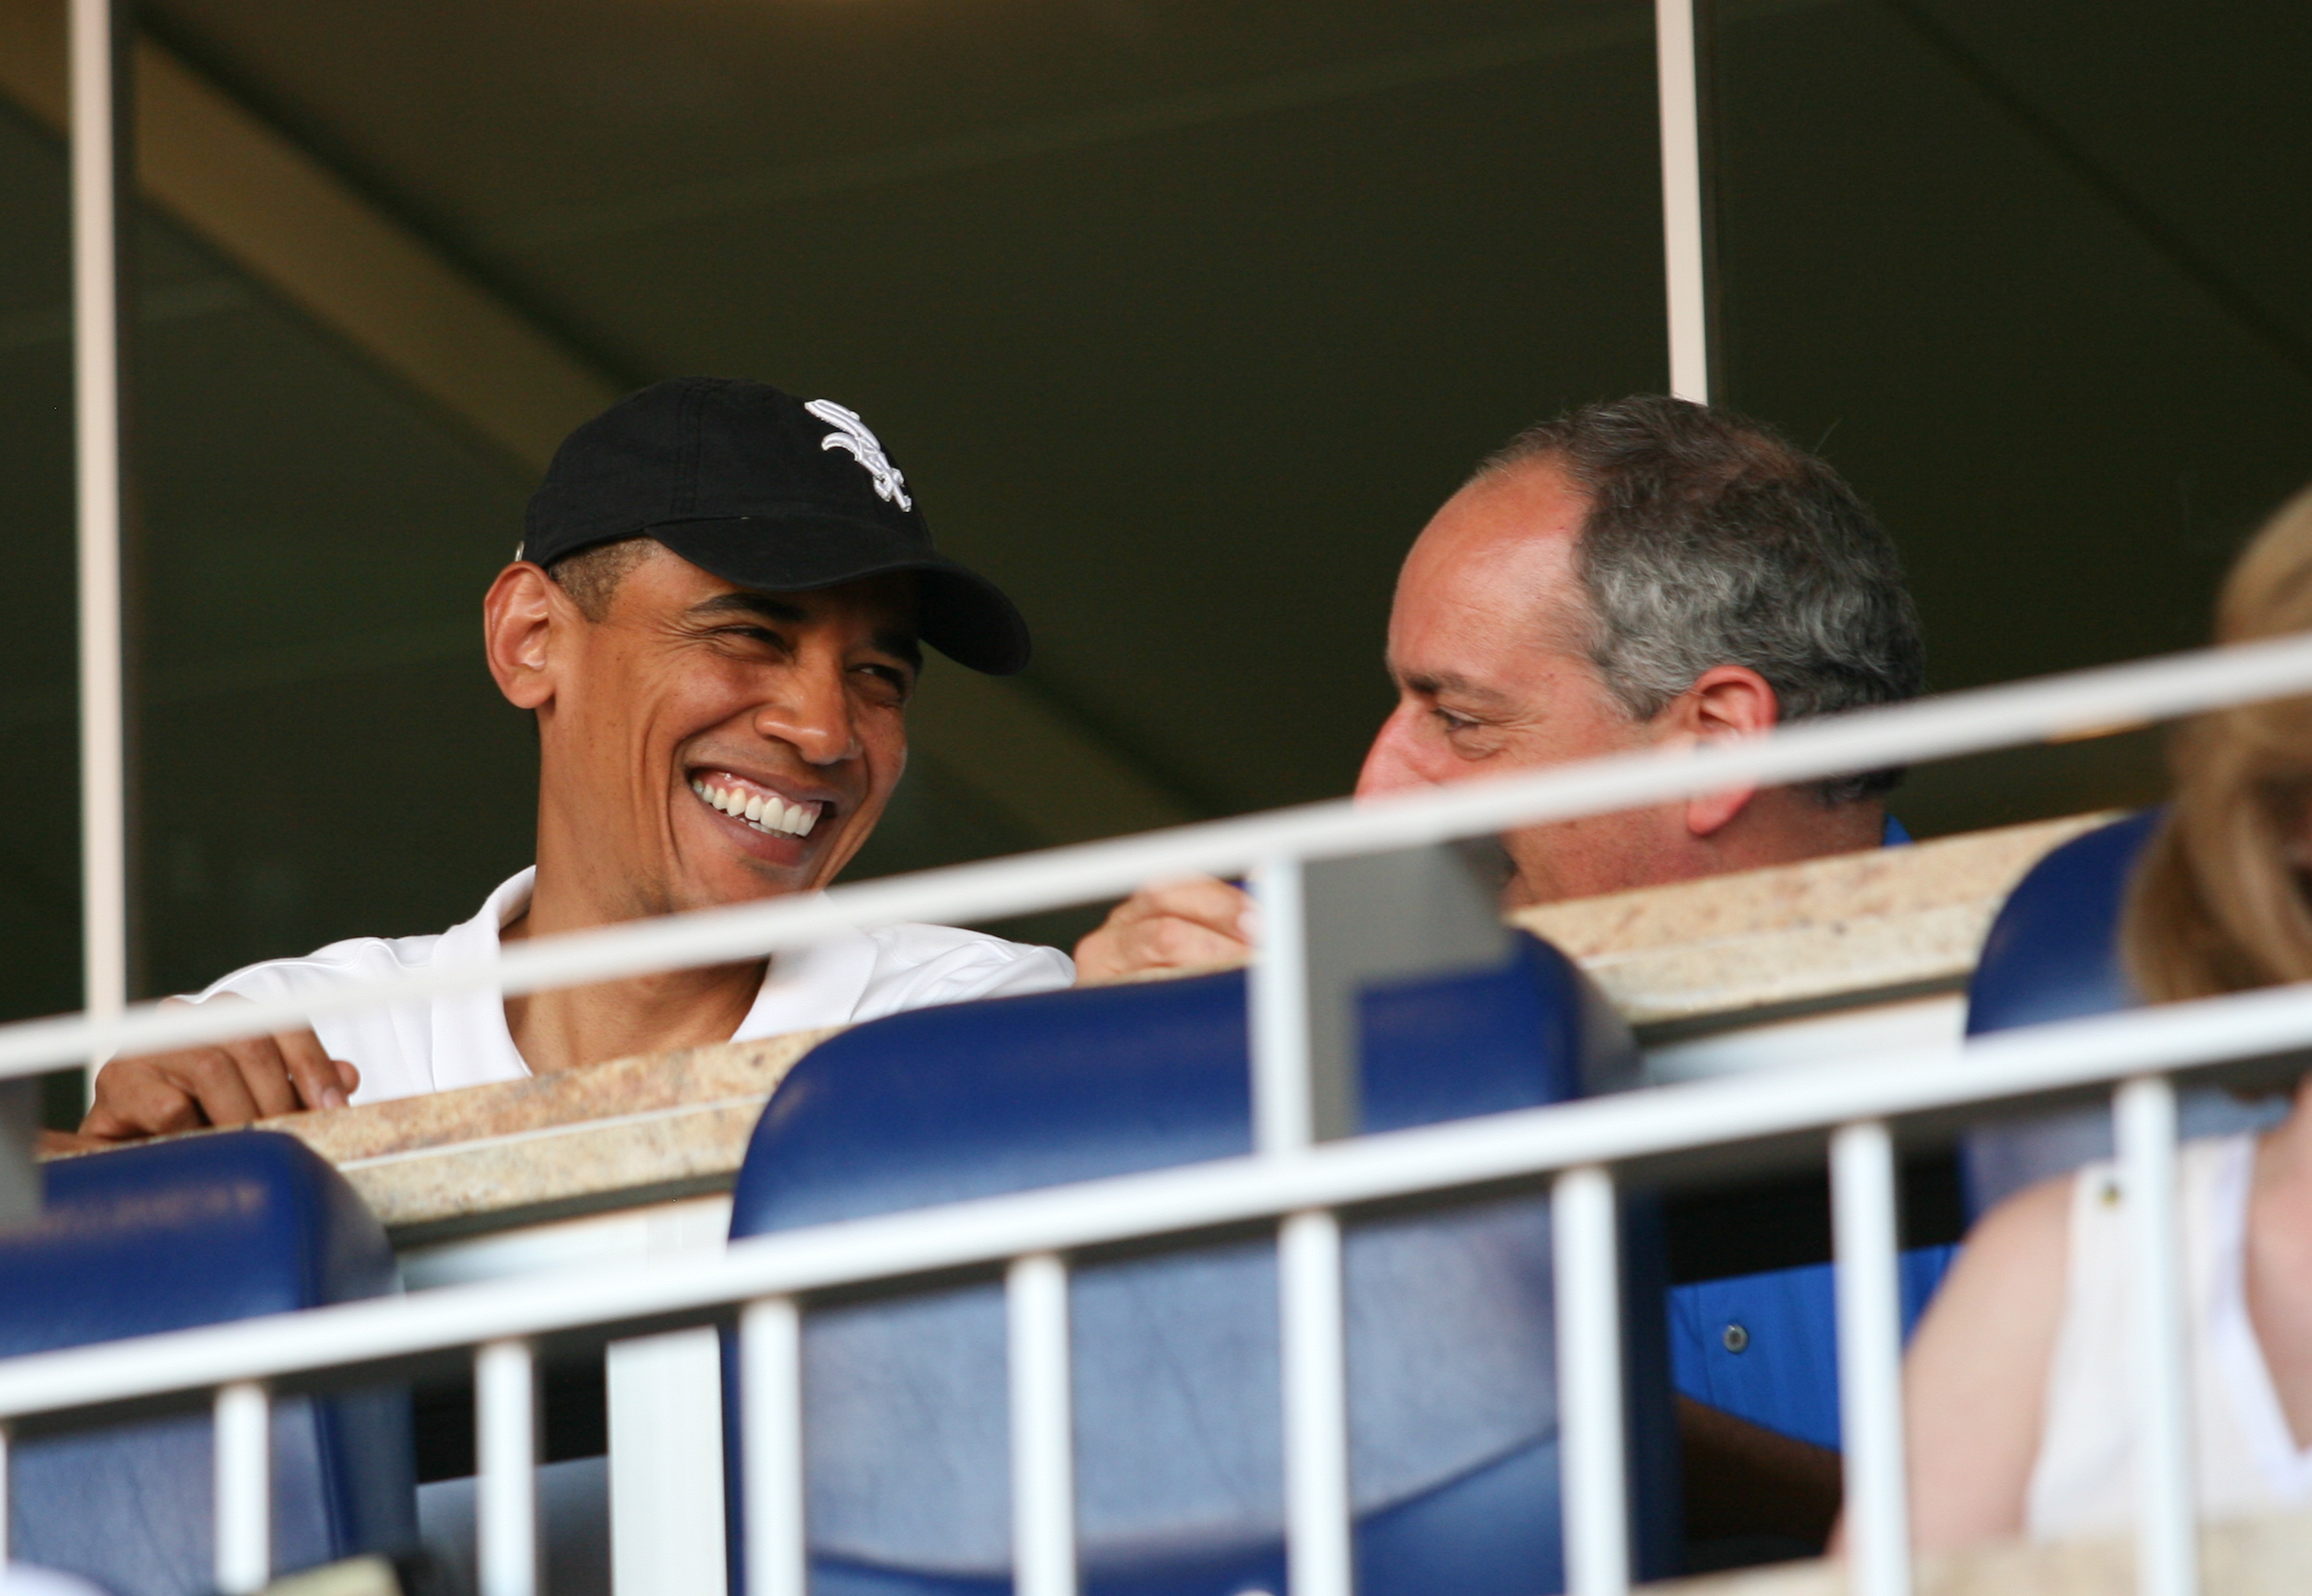 WASHINGTON - JUNE 18:  (AFP OUT) US President Barack Obama watches the Washington Nationals play against the Chicago White Sox at Nationals Park on June 18, 2010 in Washington, DC.  (Photo by Gary Fabiano-Pool/Getty Images)